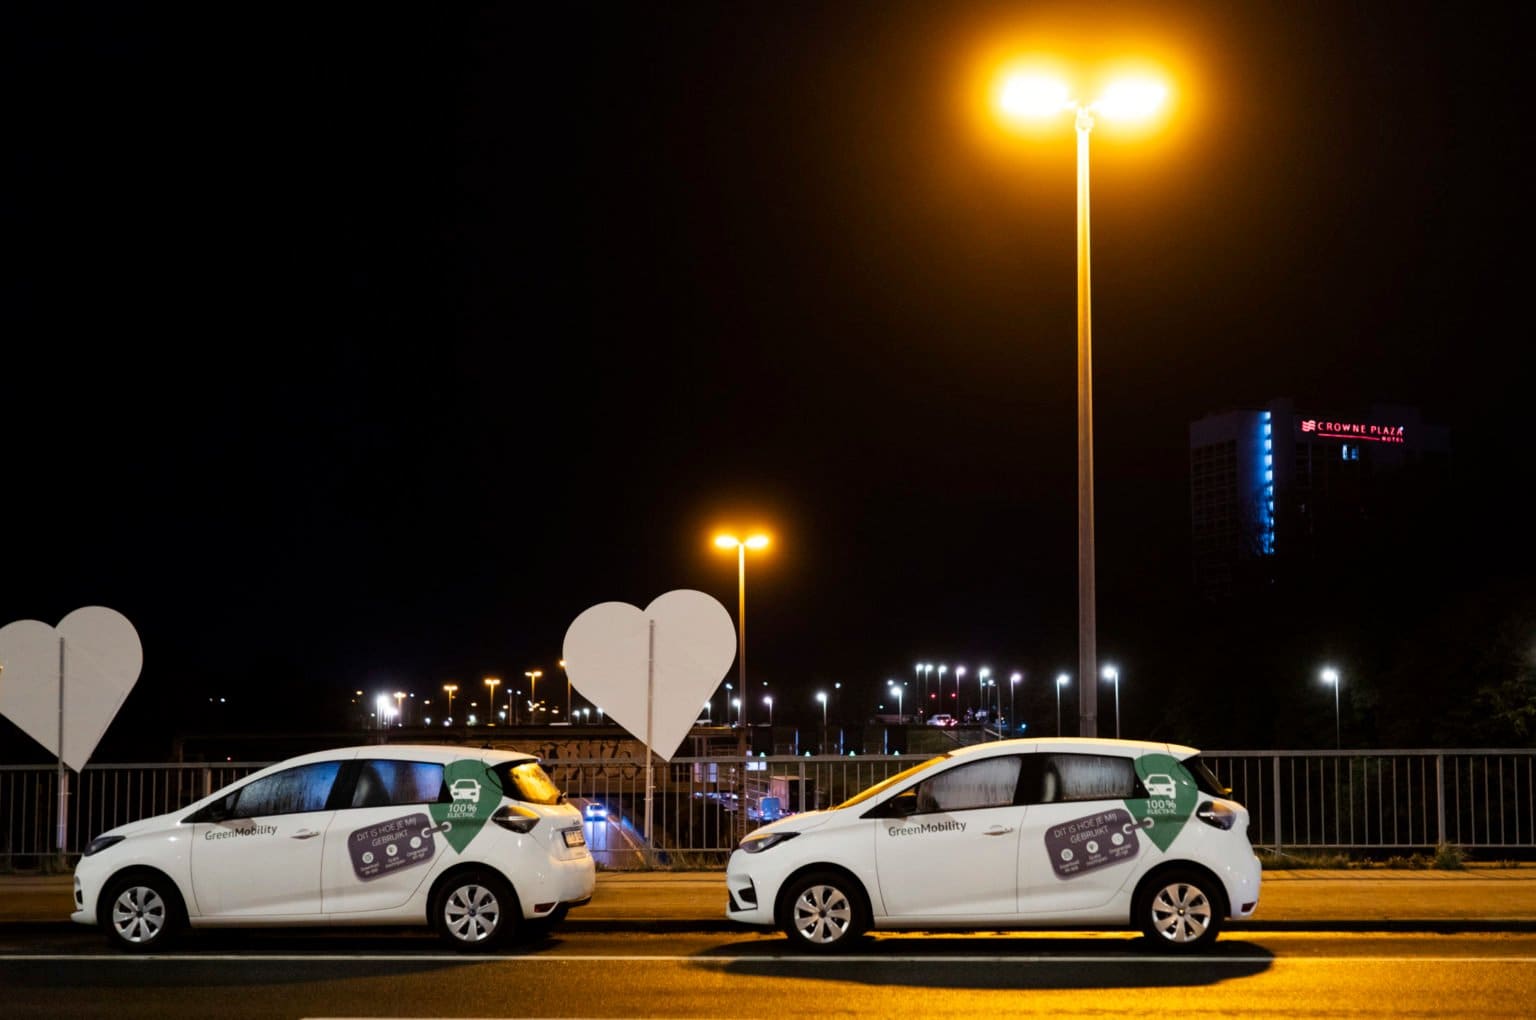 GreenMobility cars in a row at night